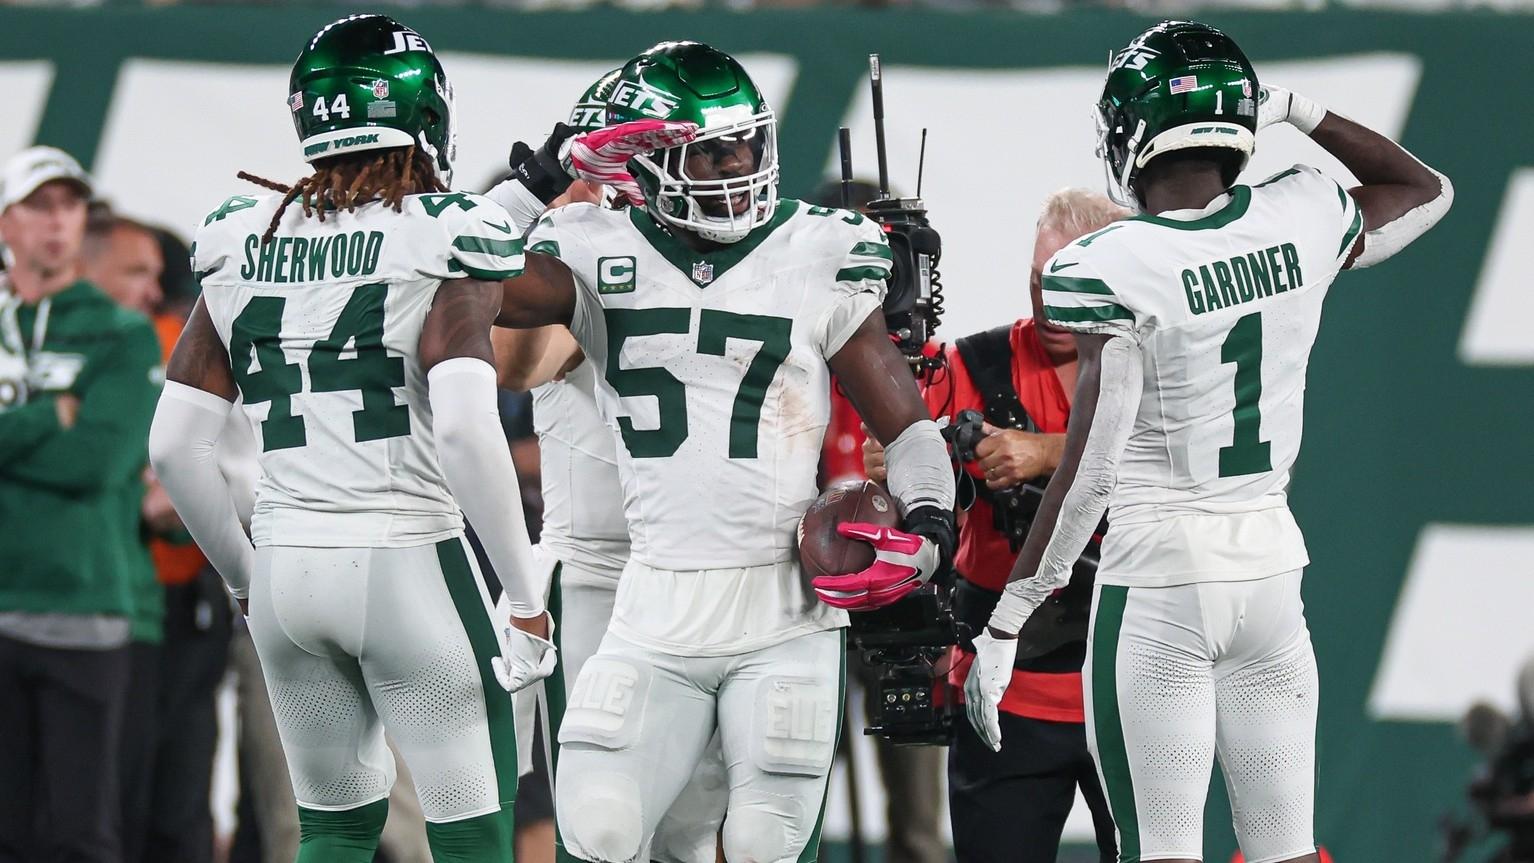 New York Jets linebacker C.J. Mosley (57) reacts after an interception during the first half against the Kansas City Chiefs at MetLife Stadium. / Vincent Carchietta-USA TODAY Sports